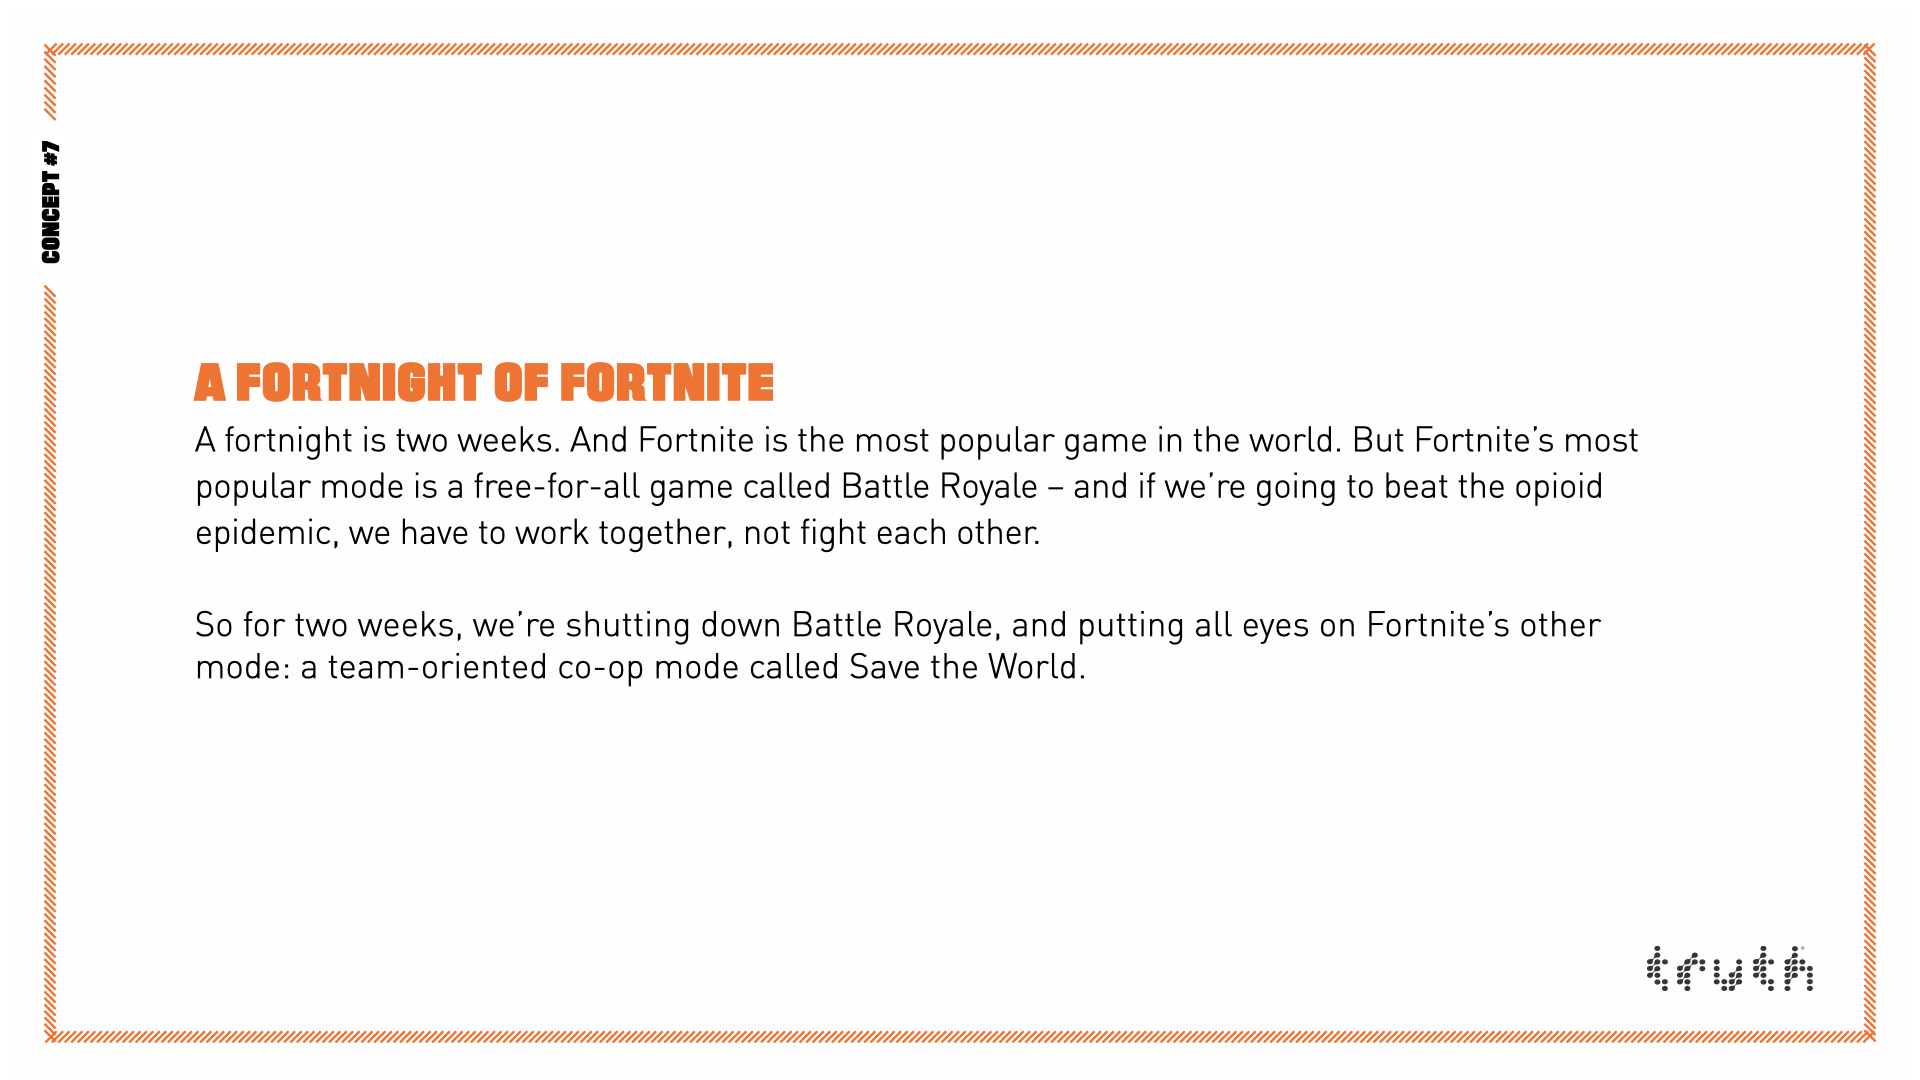 A Fortnight of Fortnite. A fortnight is two weeks. And Fortnite is the most popular game in the world. But Fortnite’s most popular mode is a free-for-all game called Battle Royale – and if we’re going to beat the opioid epidemic, we have to work together, not fight each other. So for two weeks, we’re shutting down Battle Royale, and putting all eyes on Fortnite’s other mode: a team-oriented co-op mode called Save the World.